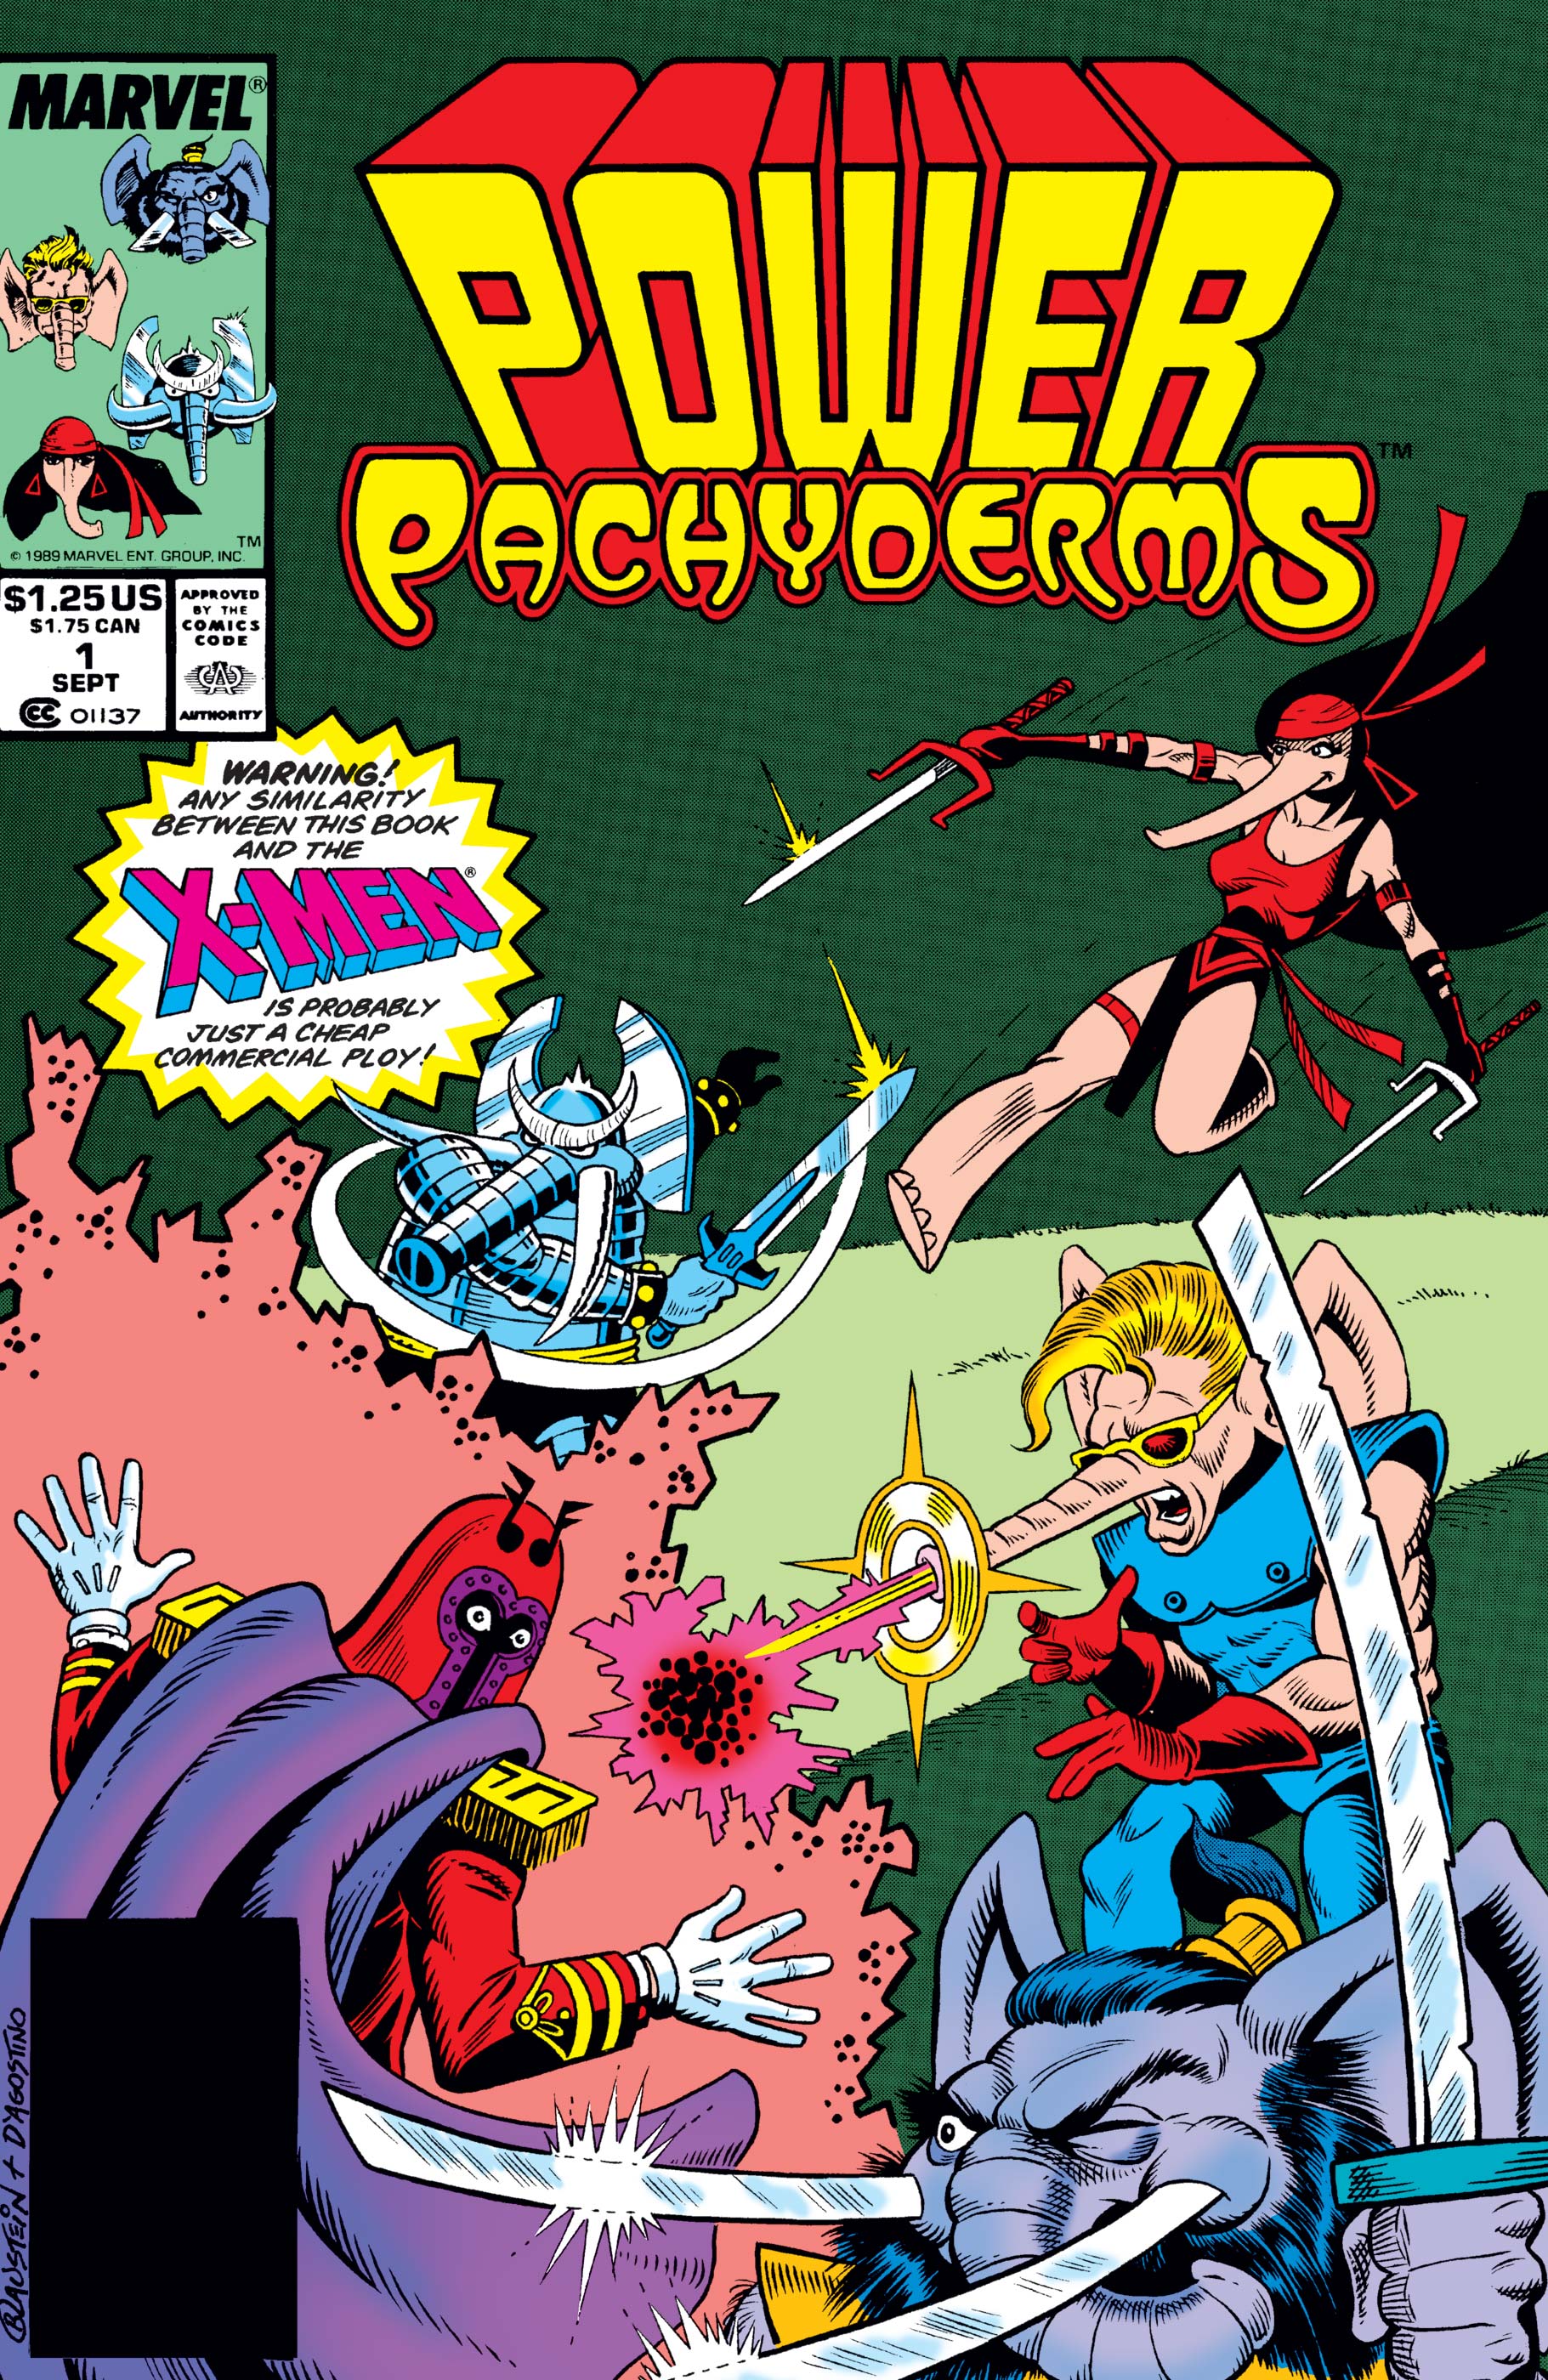 Power Pachyderms (1989) #1